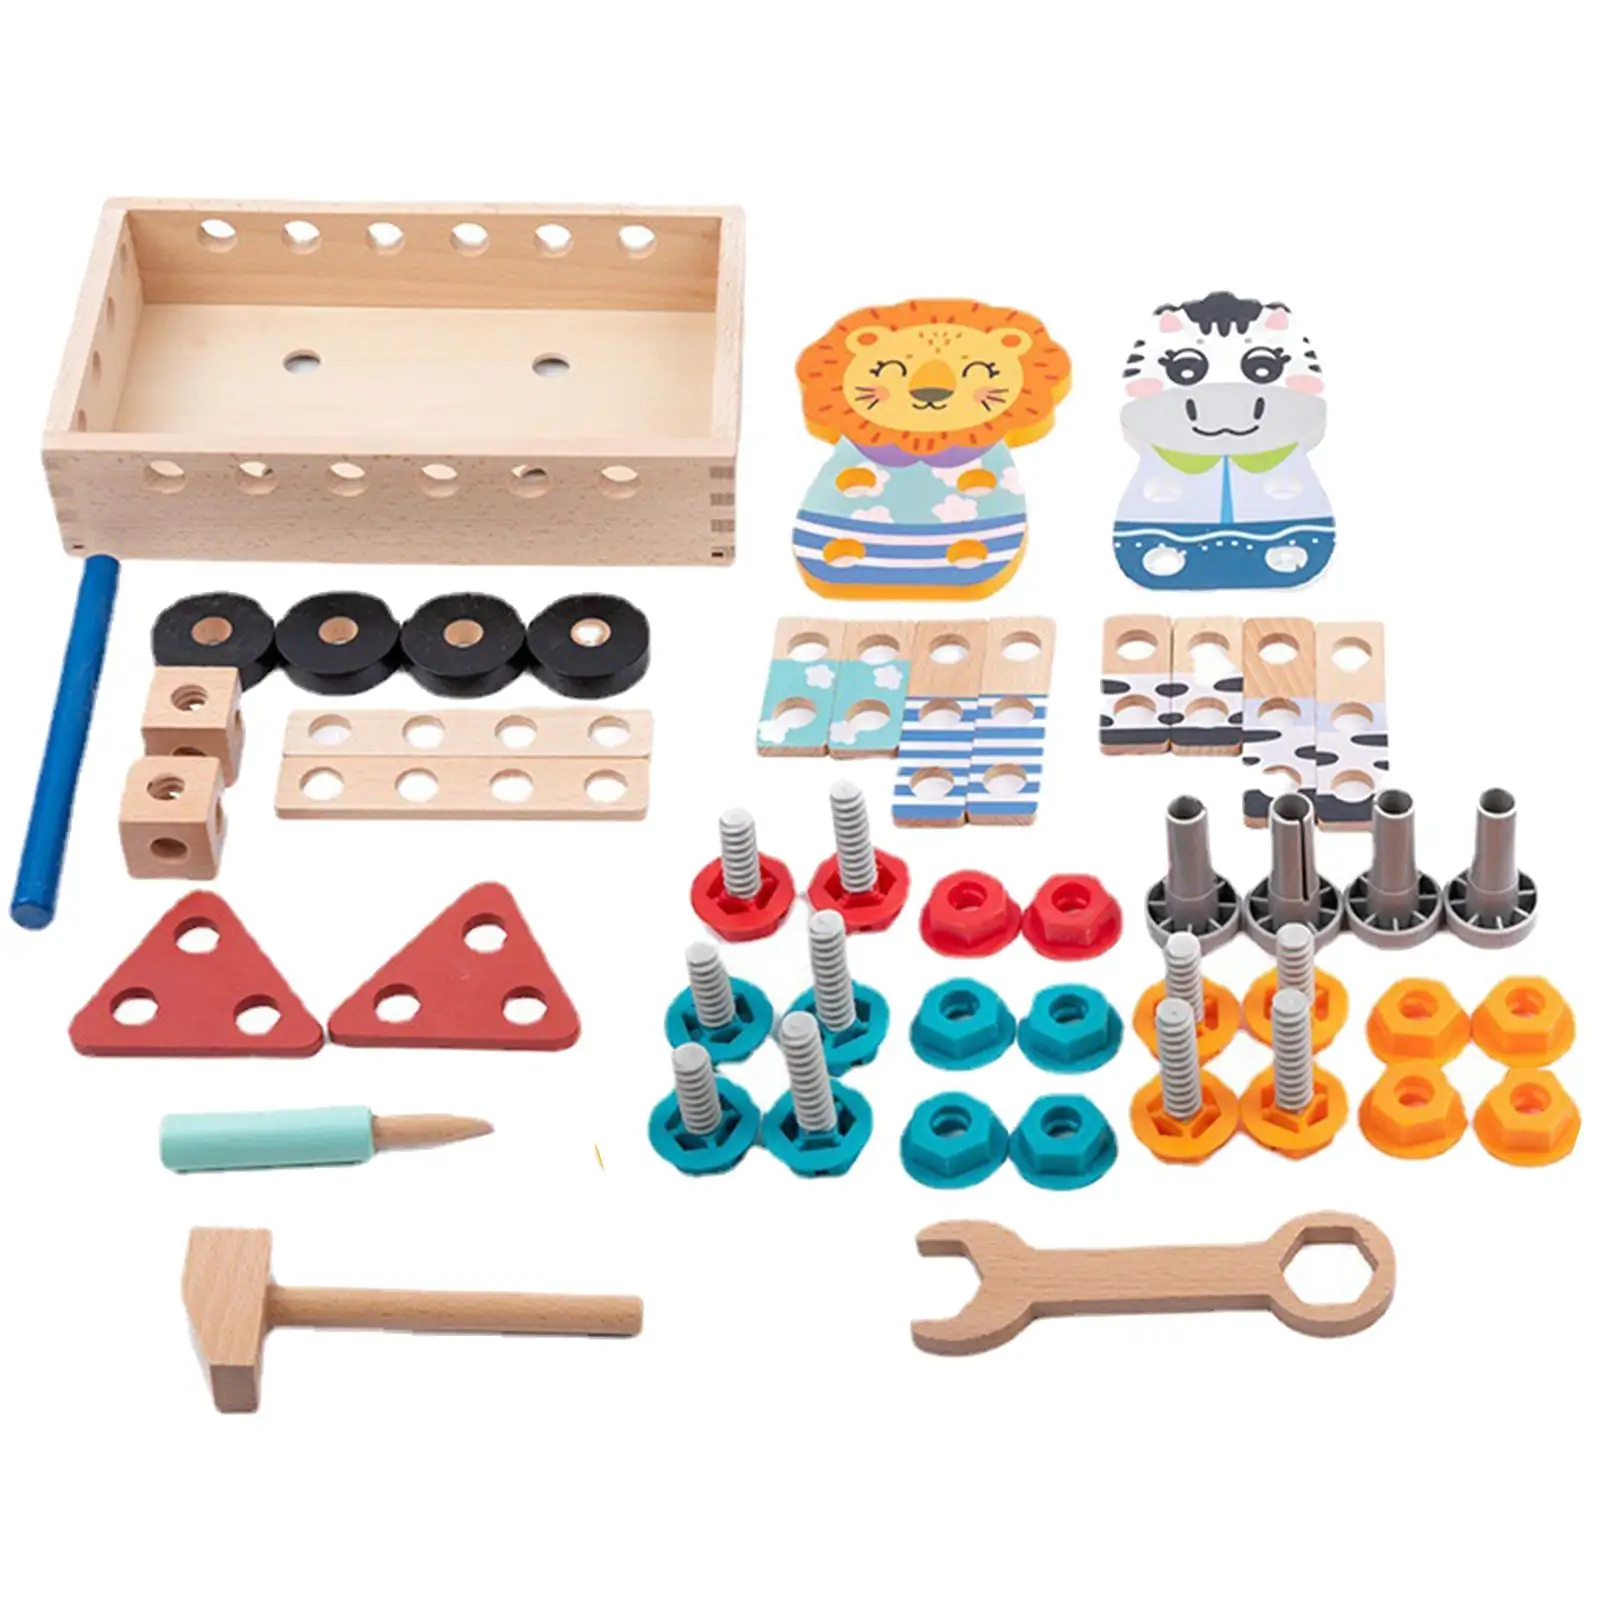 Kids Construction Toy Set Educational Fine Motor Skills Kids Toolbox Set for Education Learning Indoor Activities Role Play